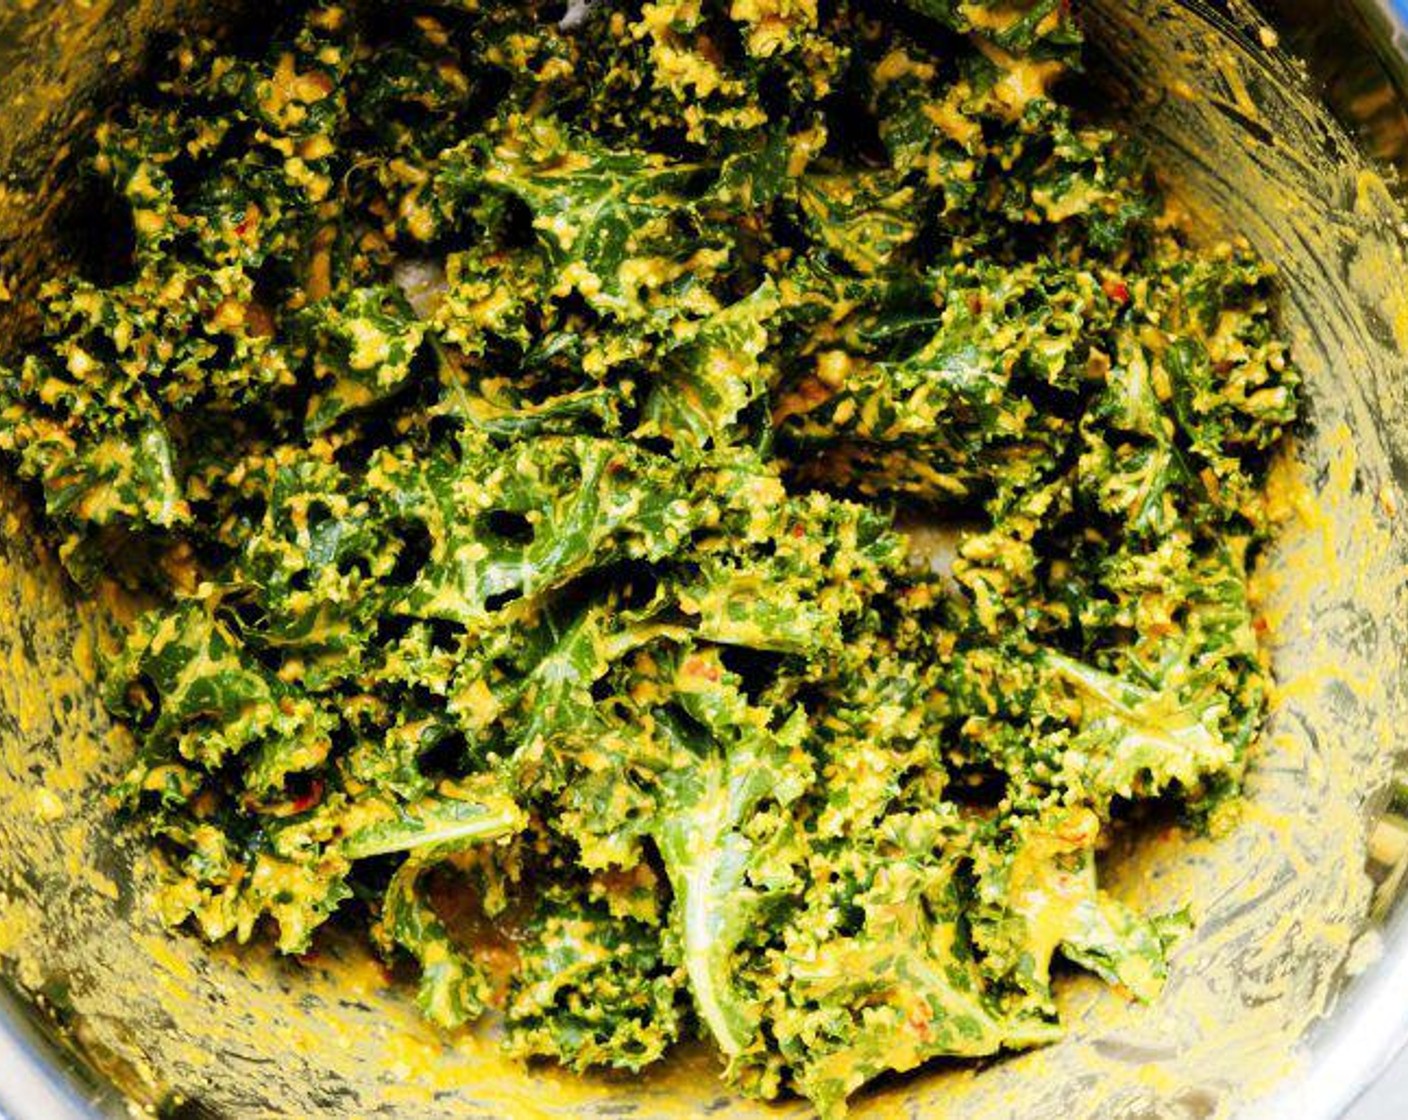 step 5 Transfer the cashew cheese mixture to the prep bowl containing the kale leaves. With gloved hands, massage the cheese mixture into the kale ensuring each piece is well-coated front and back.